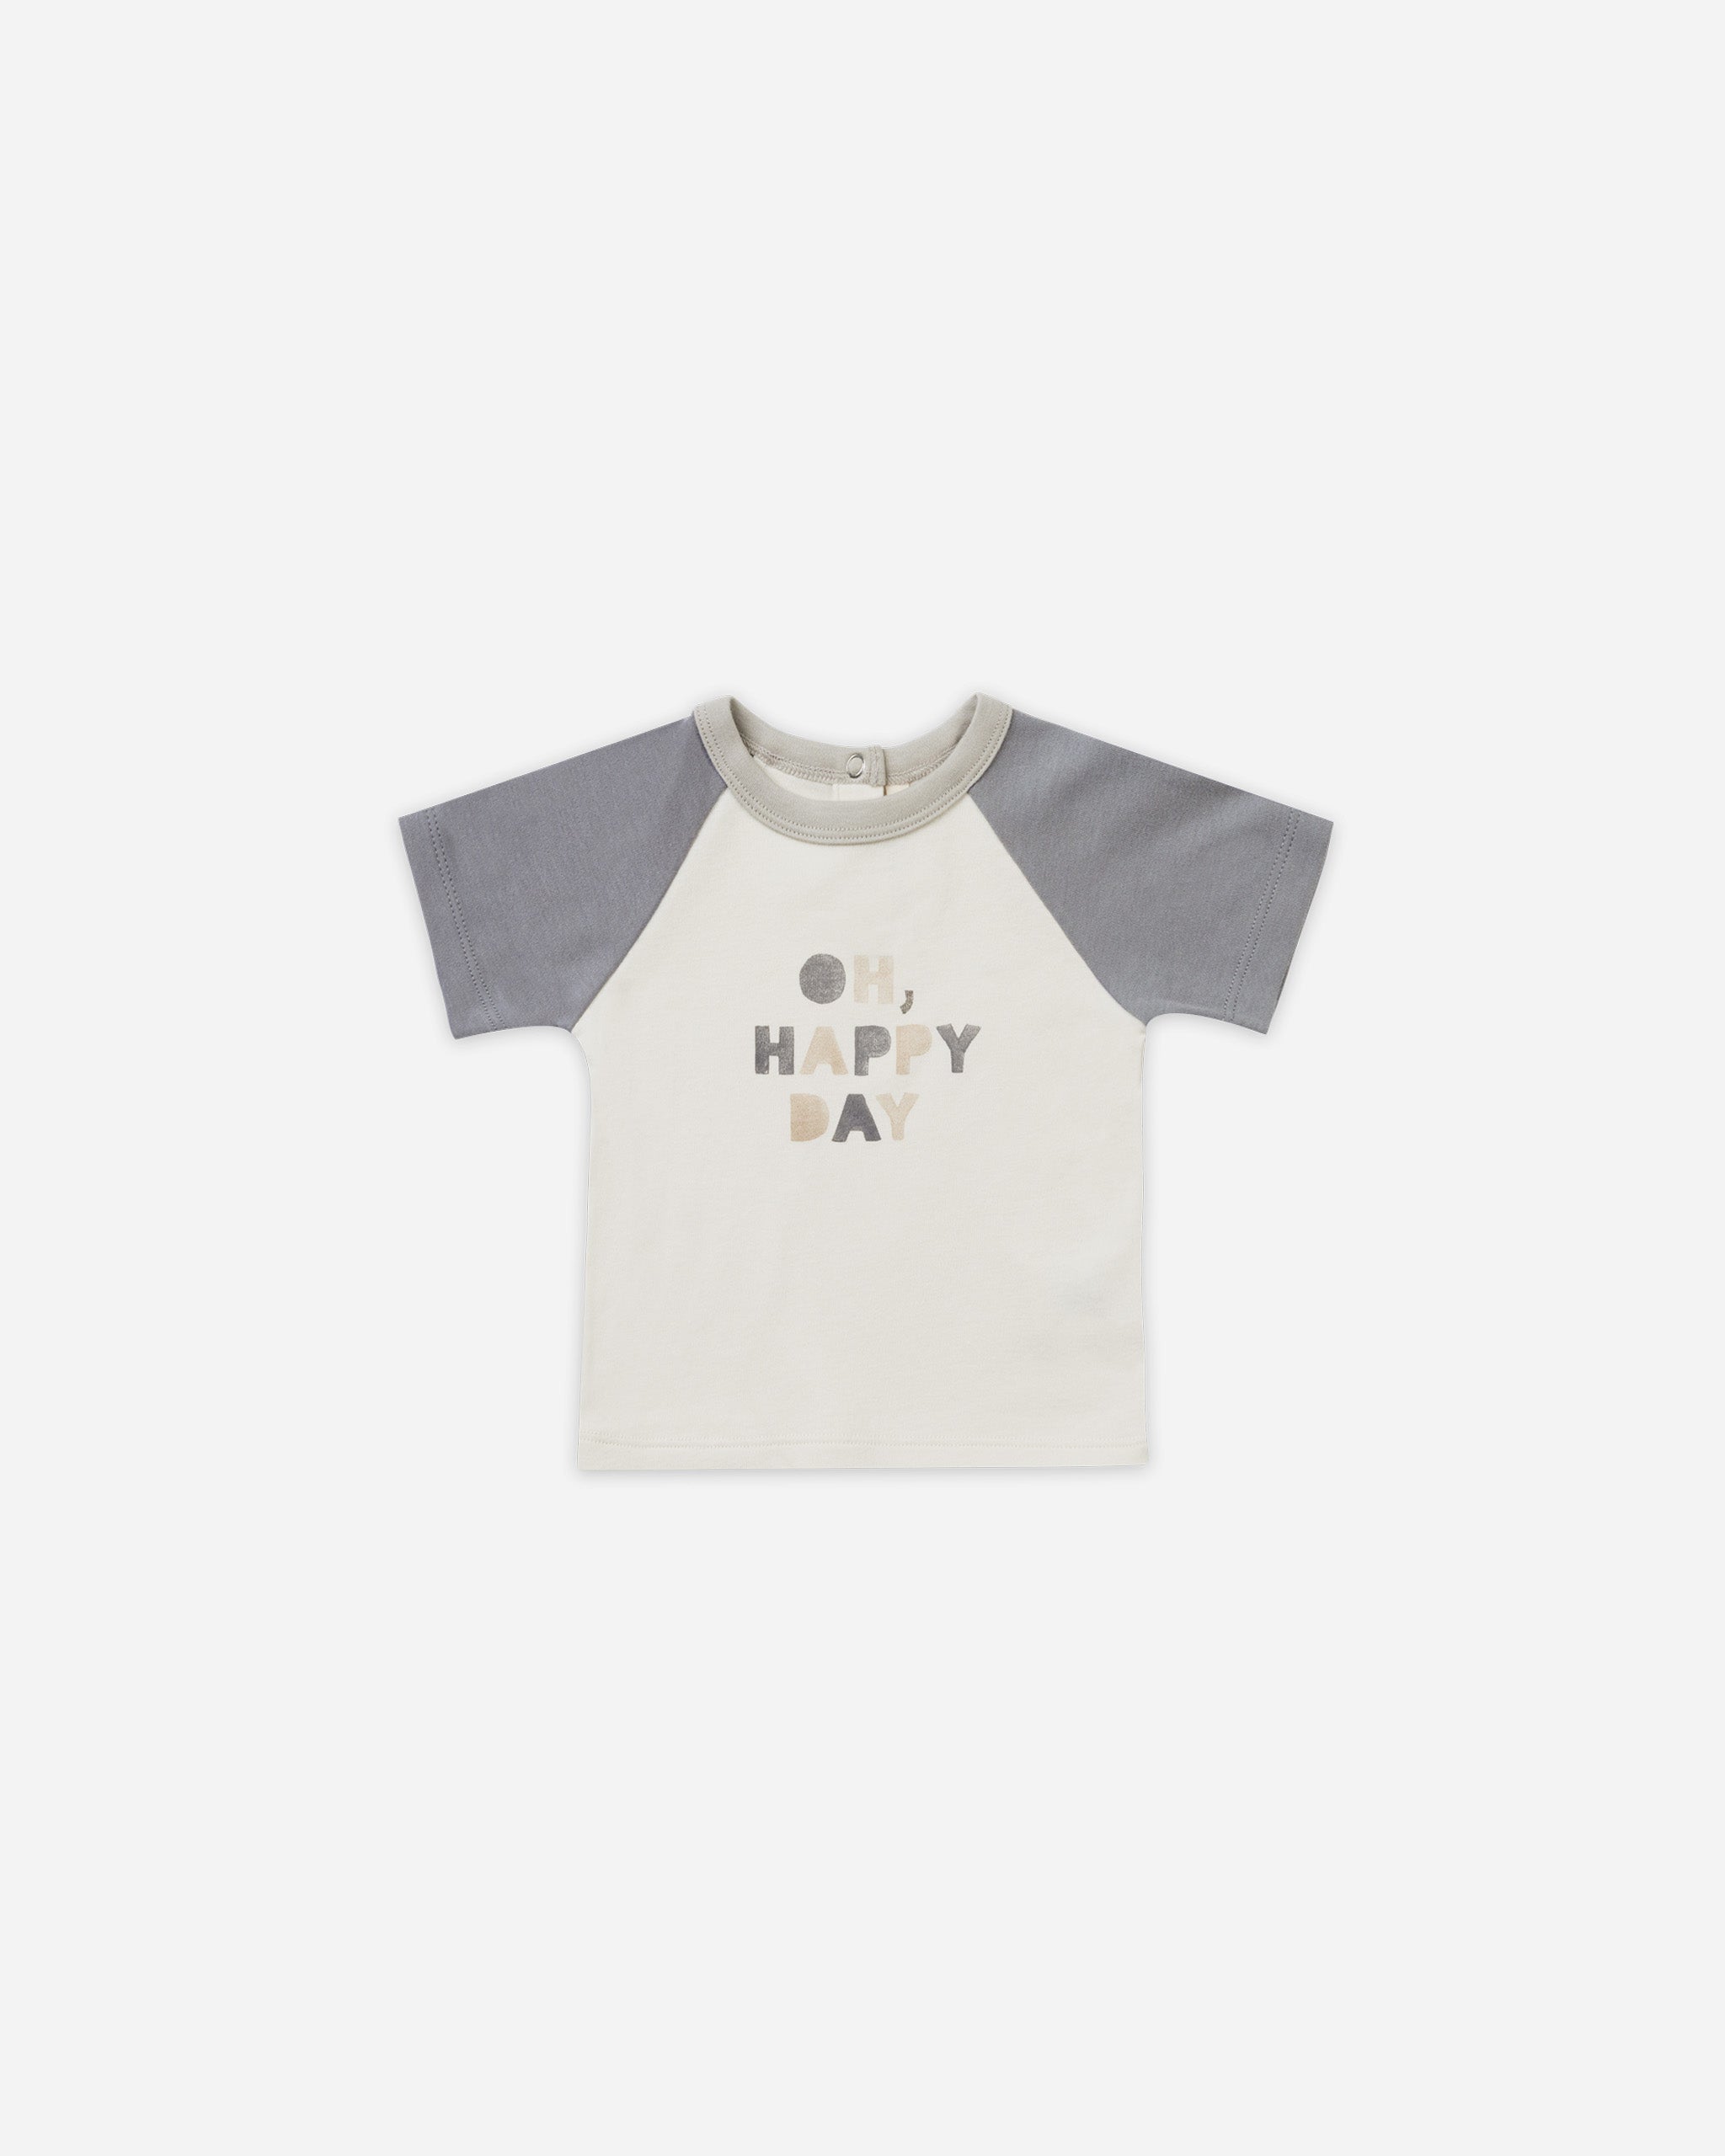 Color Block Raglan Tee || Oh, Happy Day - Rylee + Cru | Kids Clothes | Trendy Baby Clothes | Modern Infant Outfits |